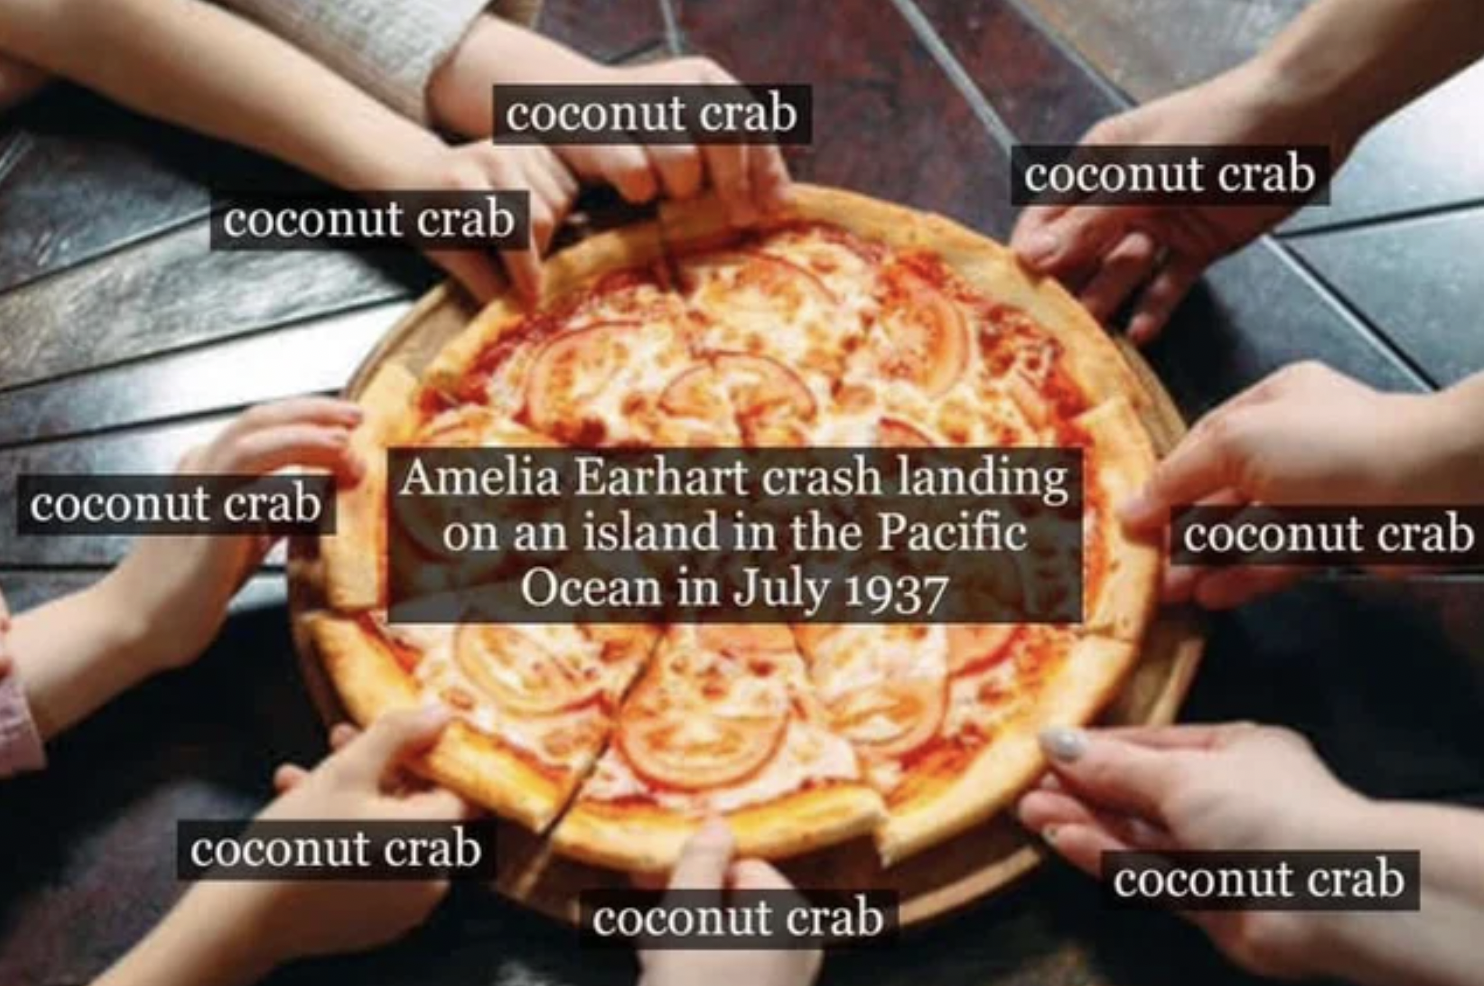 Oddly Specific Pictures - pizza cheese - coconut crab coconut crab coconut crab coconut crab Amelia Earhart crash landing on an island in the Pacific Ocean in coconut crab coconut crab coconut crab coconut crab